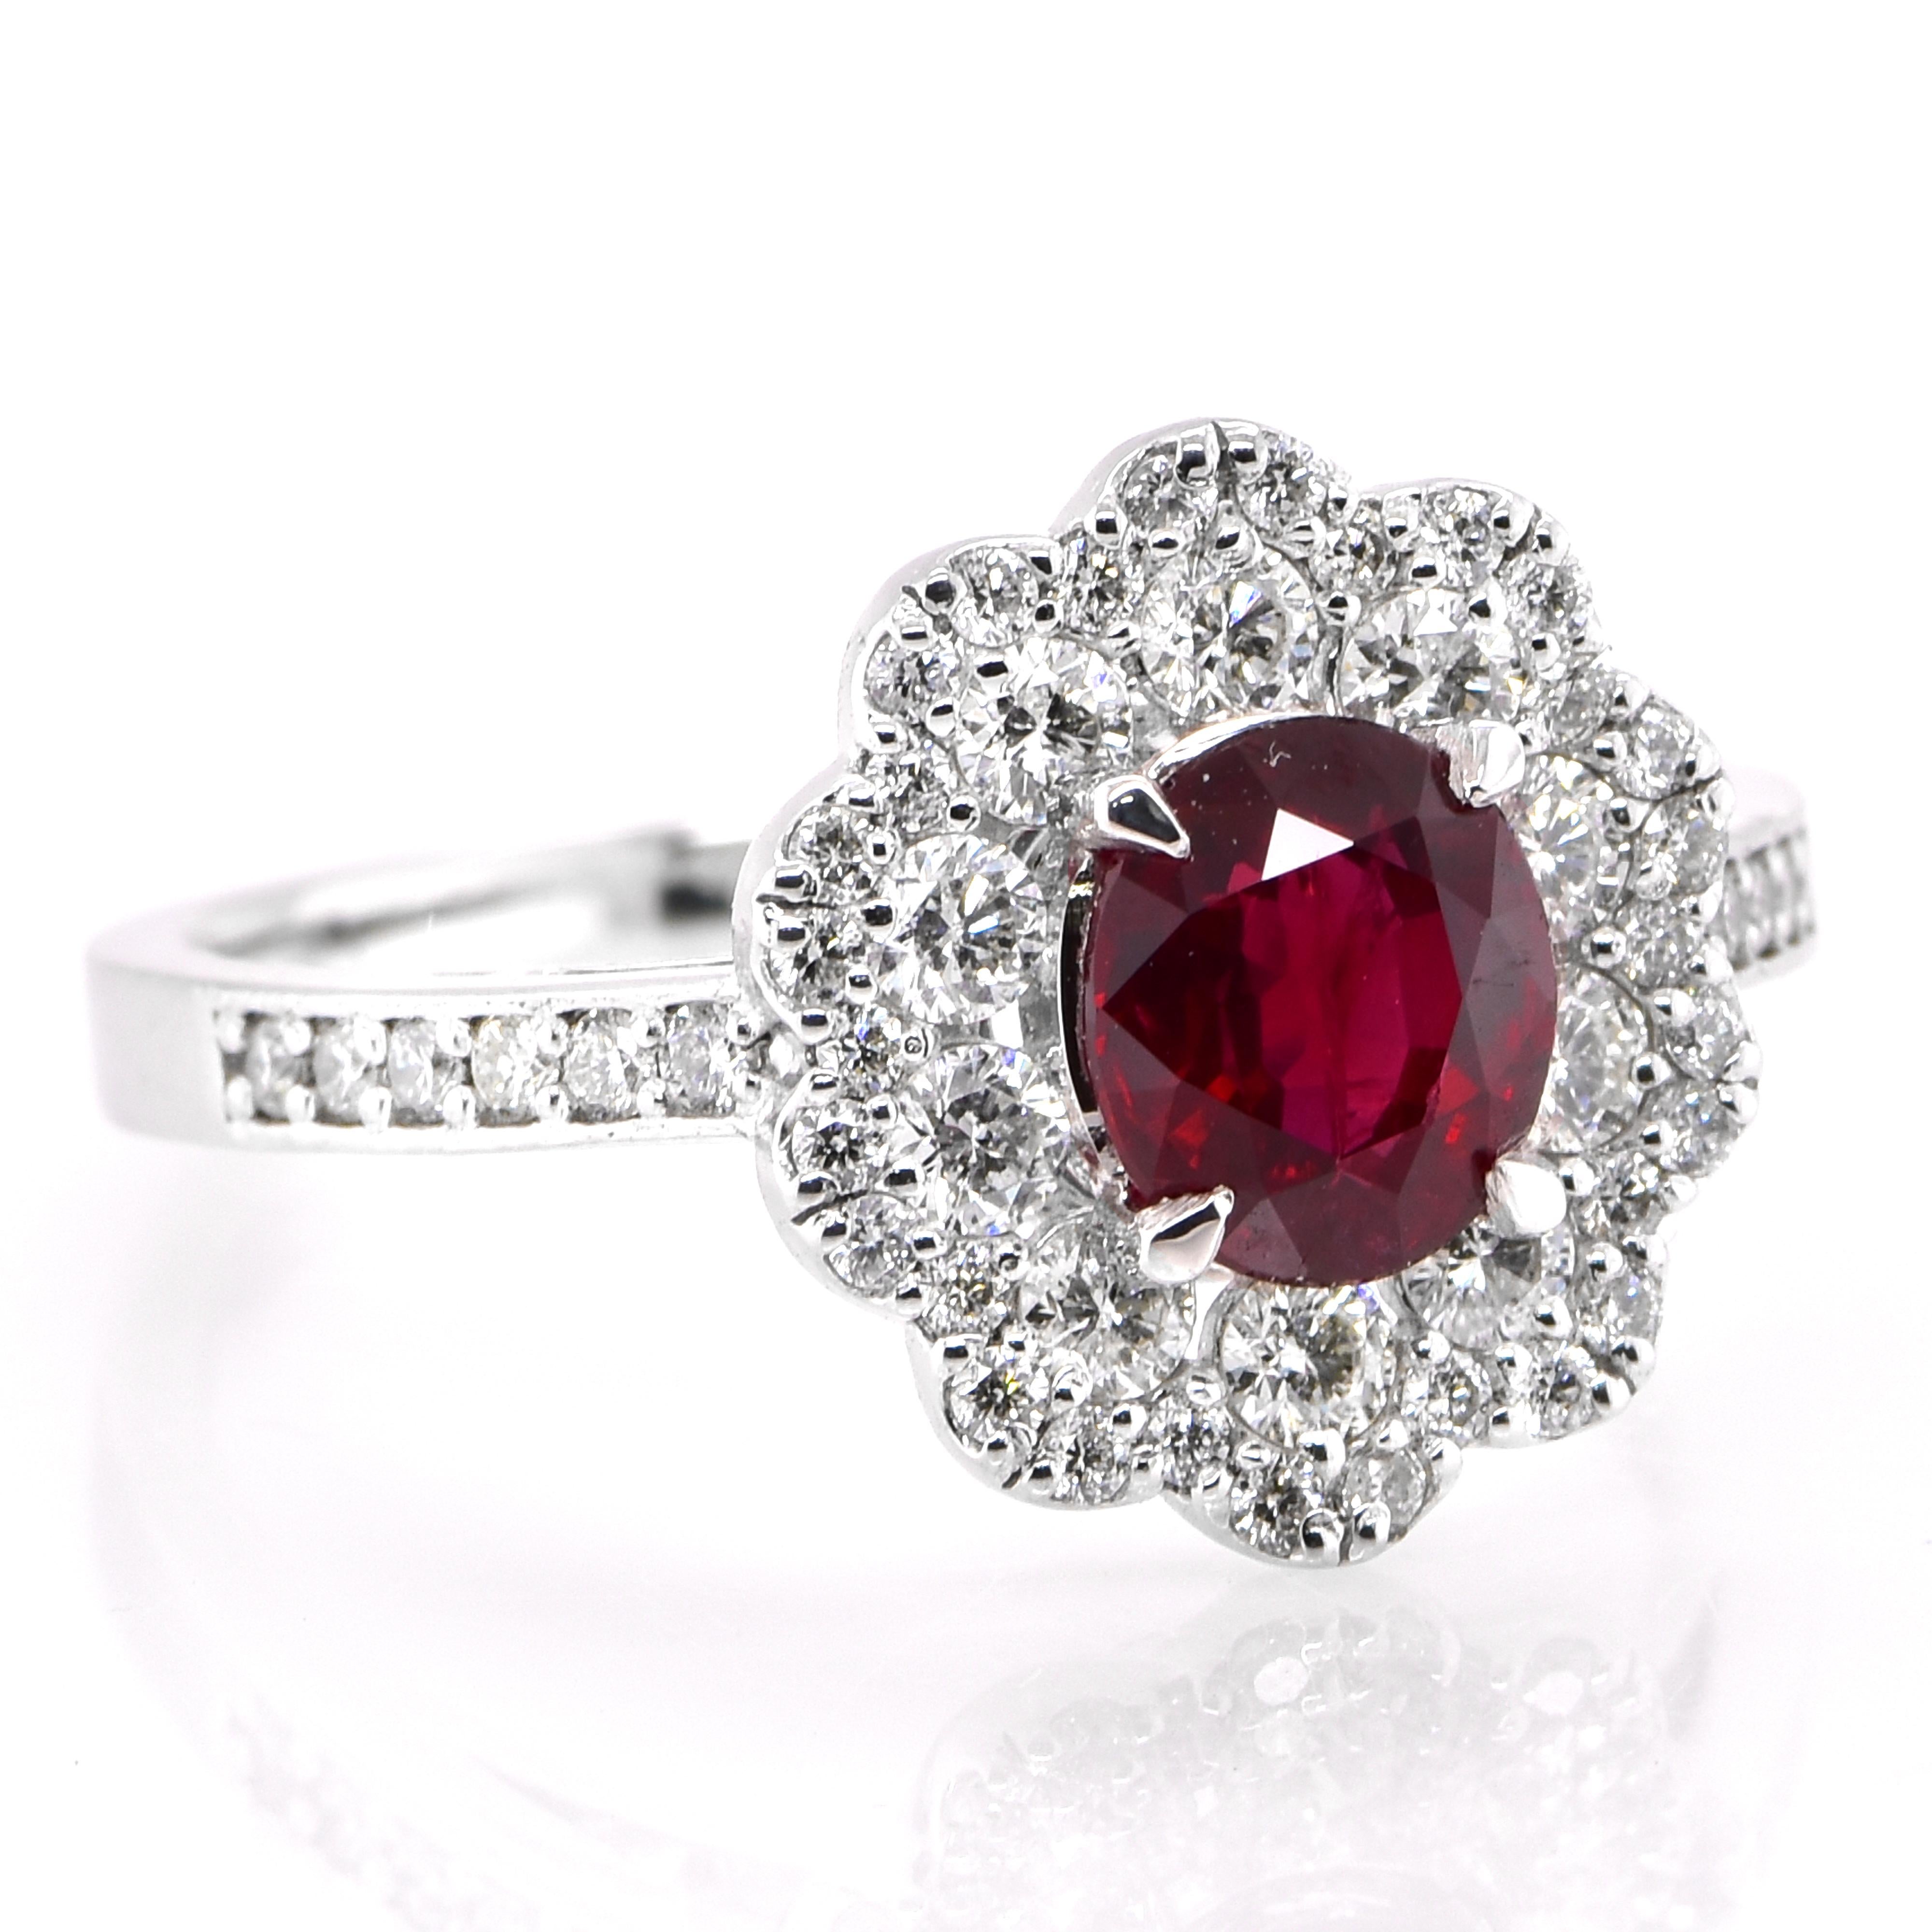 Modern GIA Certified 1.13 Carat Natural, Unheated Ruby and Diamond Ring set in Platinum